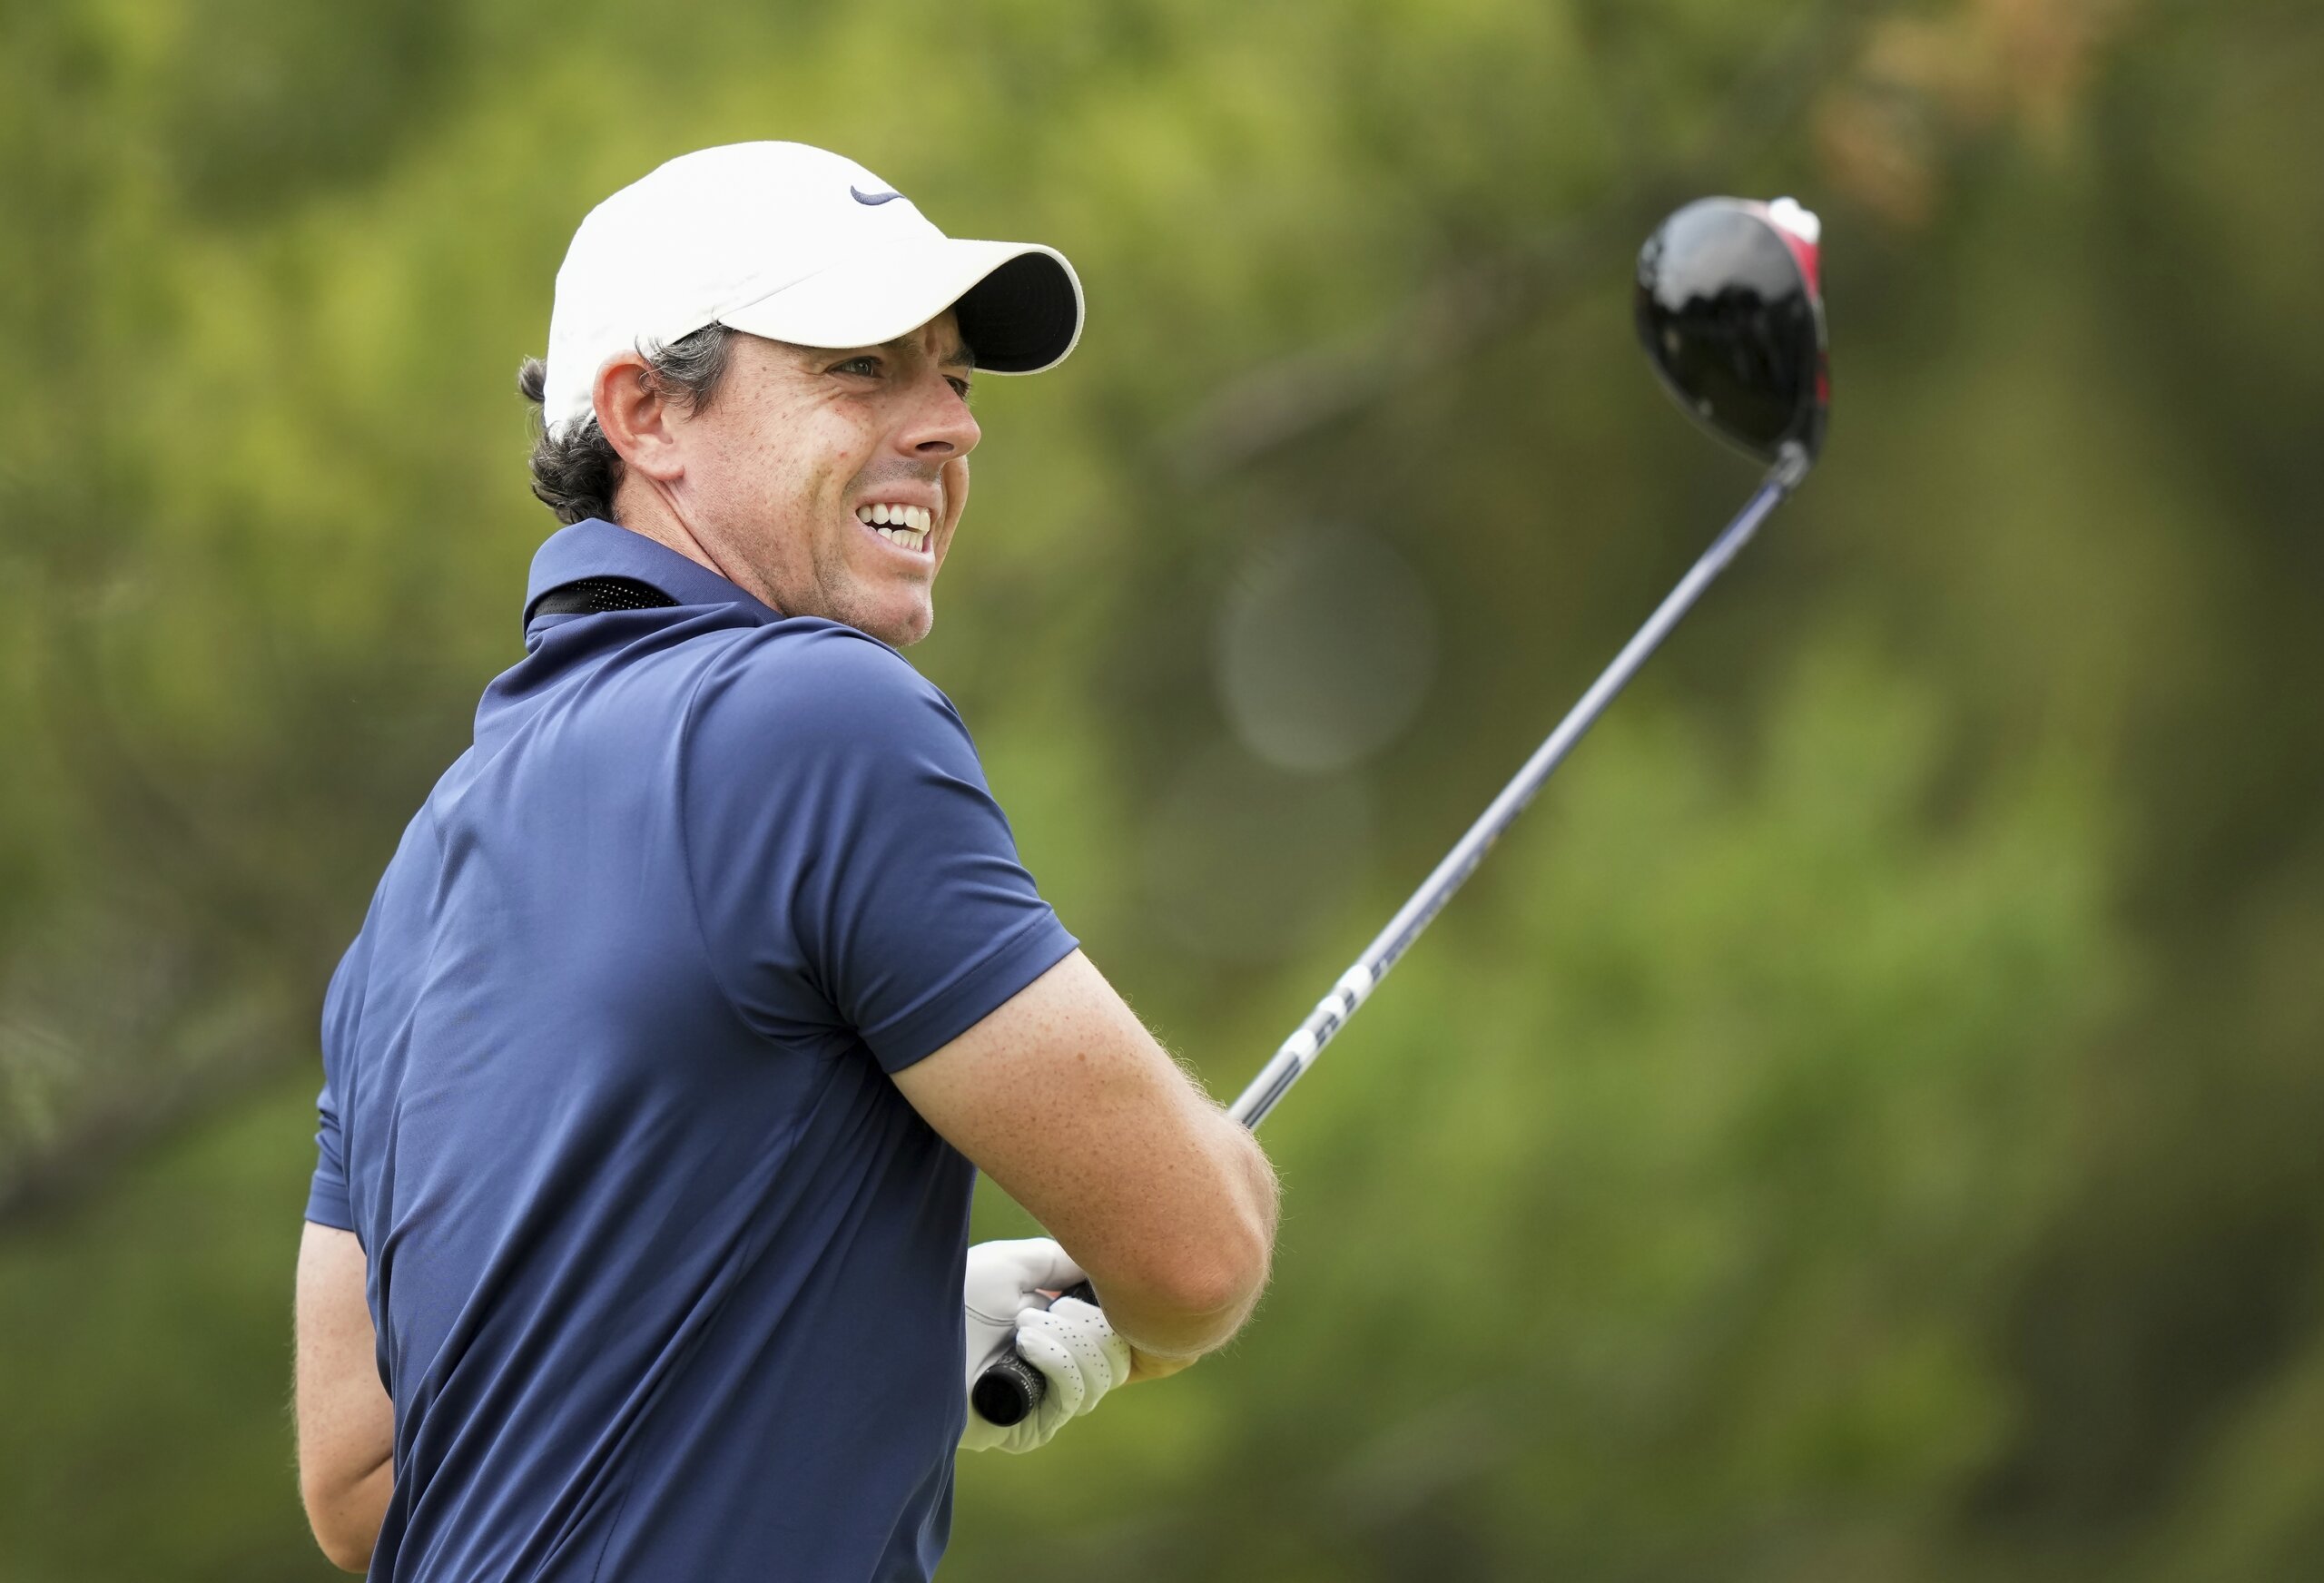 Pan leads Canadian Open, with McIlroy 2 shots back on crowded